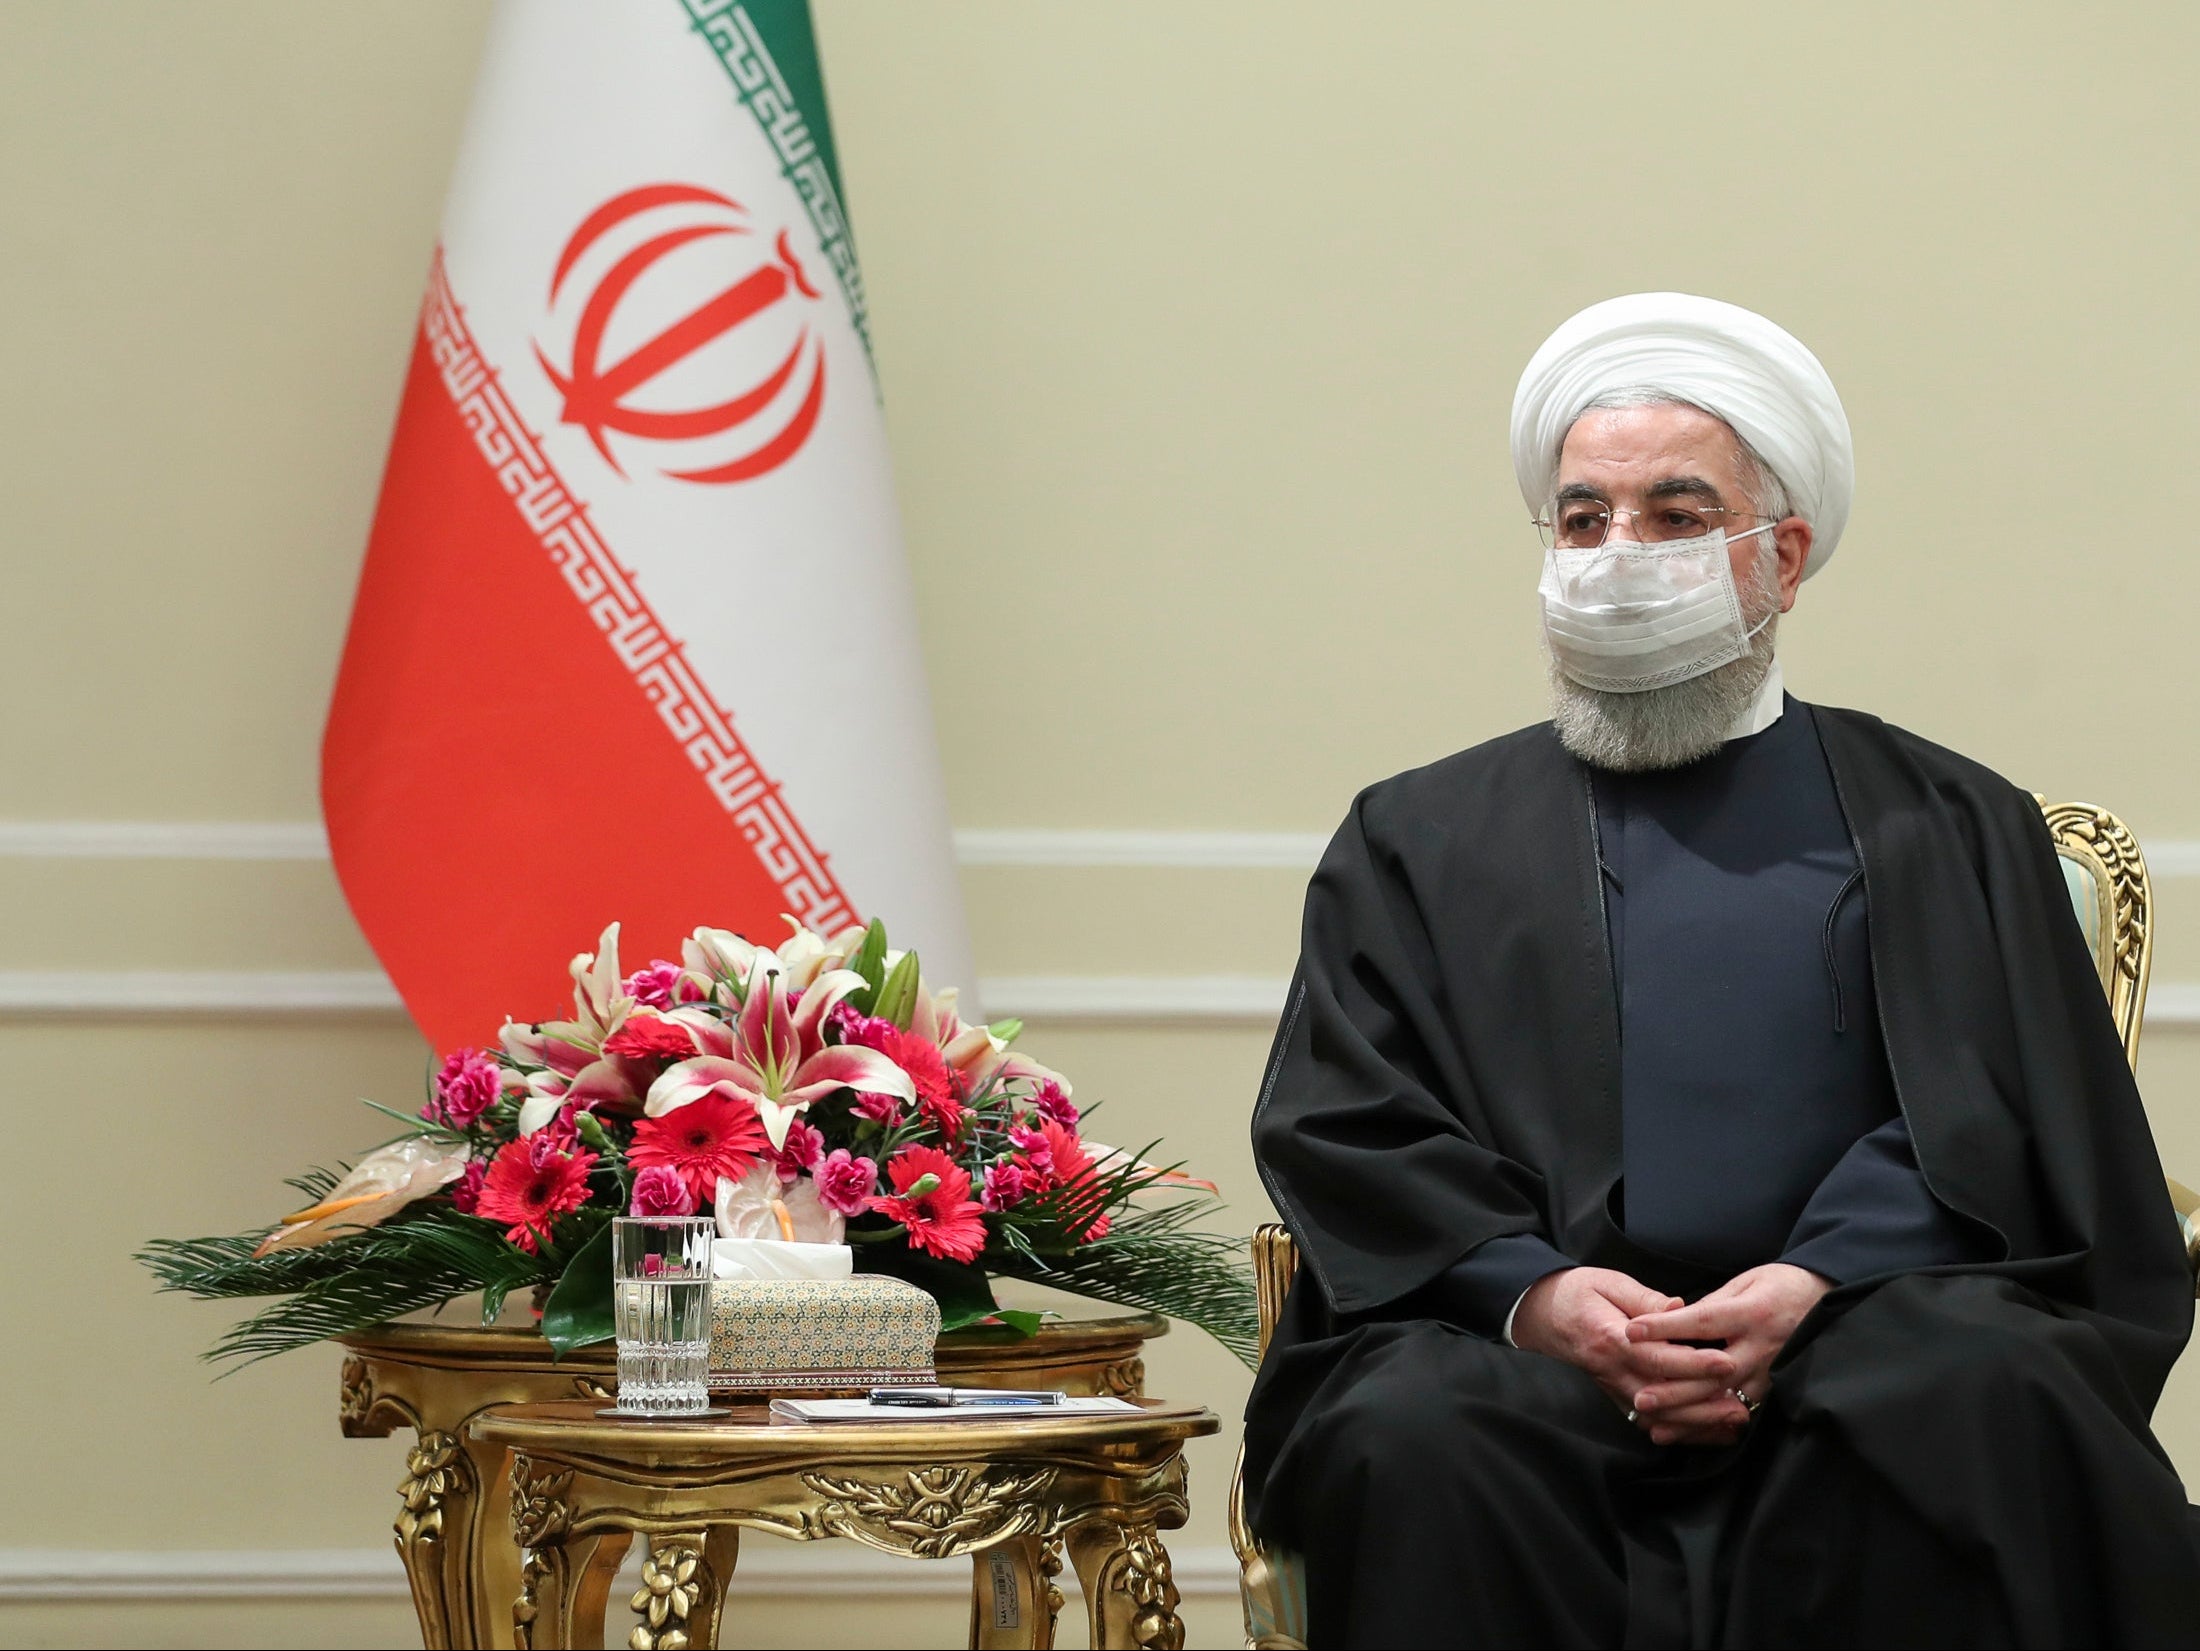 Rouhani said in March his country is prepared to take steps to live up to measures in the 2015 nuclear deal with world powers as soon as the United States lifts economic sanctions on Iran